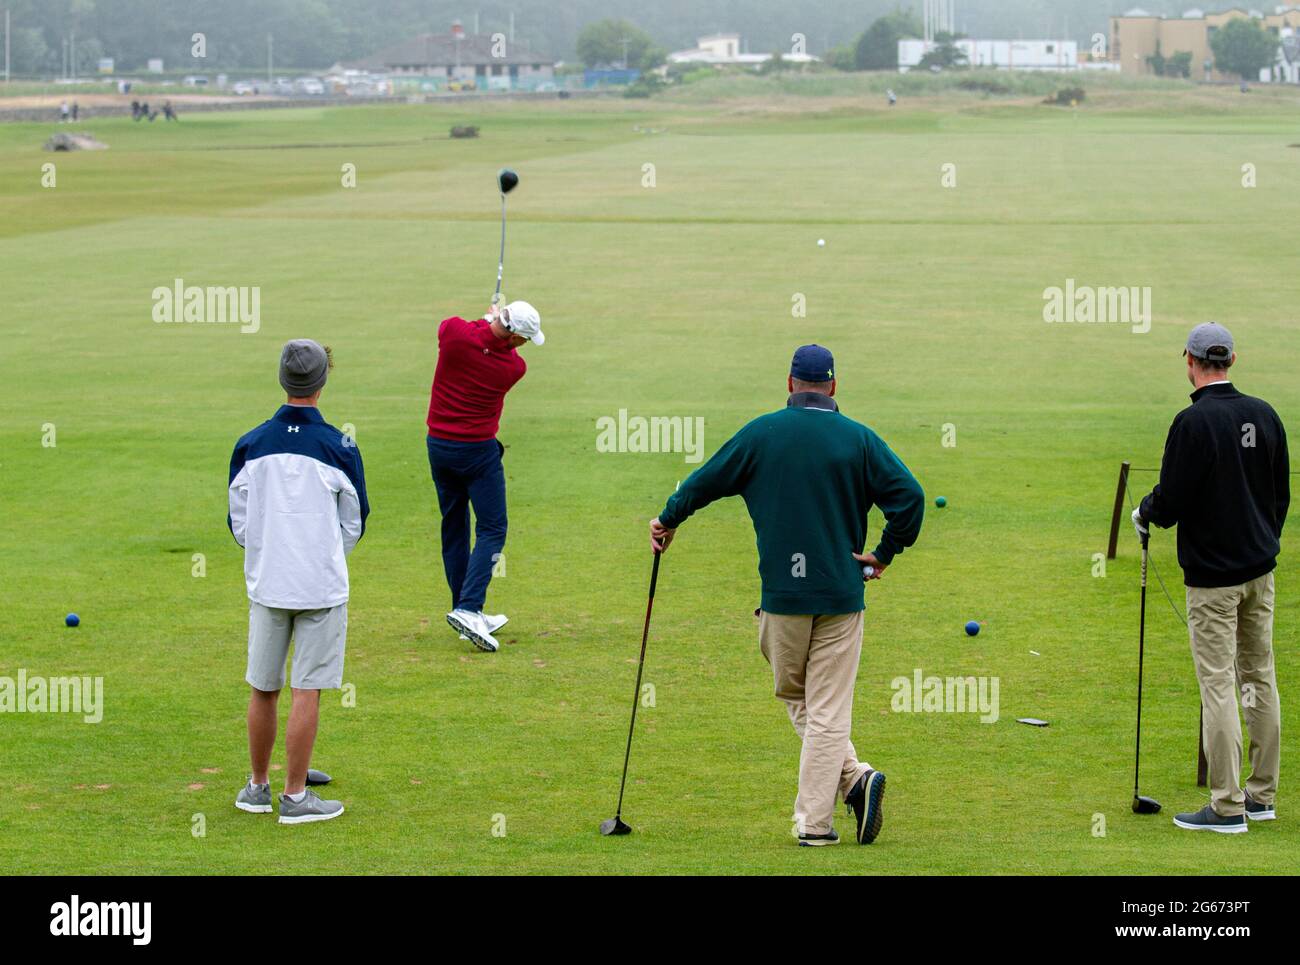 St Andrews, Fife, Scotland, UK. 3rd July, 2021. UK Weather: A cool misty day across North East Scotland with temperatures reaching 15°C. Local residents get together for a day out to enjoy a game of golf at The Old Course at St Andrews Links. Credit: Dundee Photographics/Alamy Live News Stock Photo